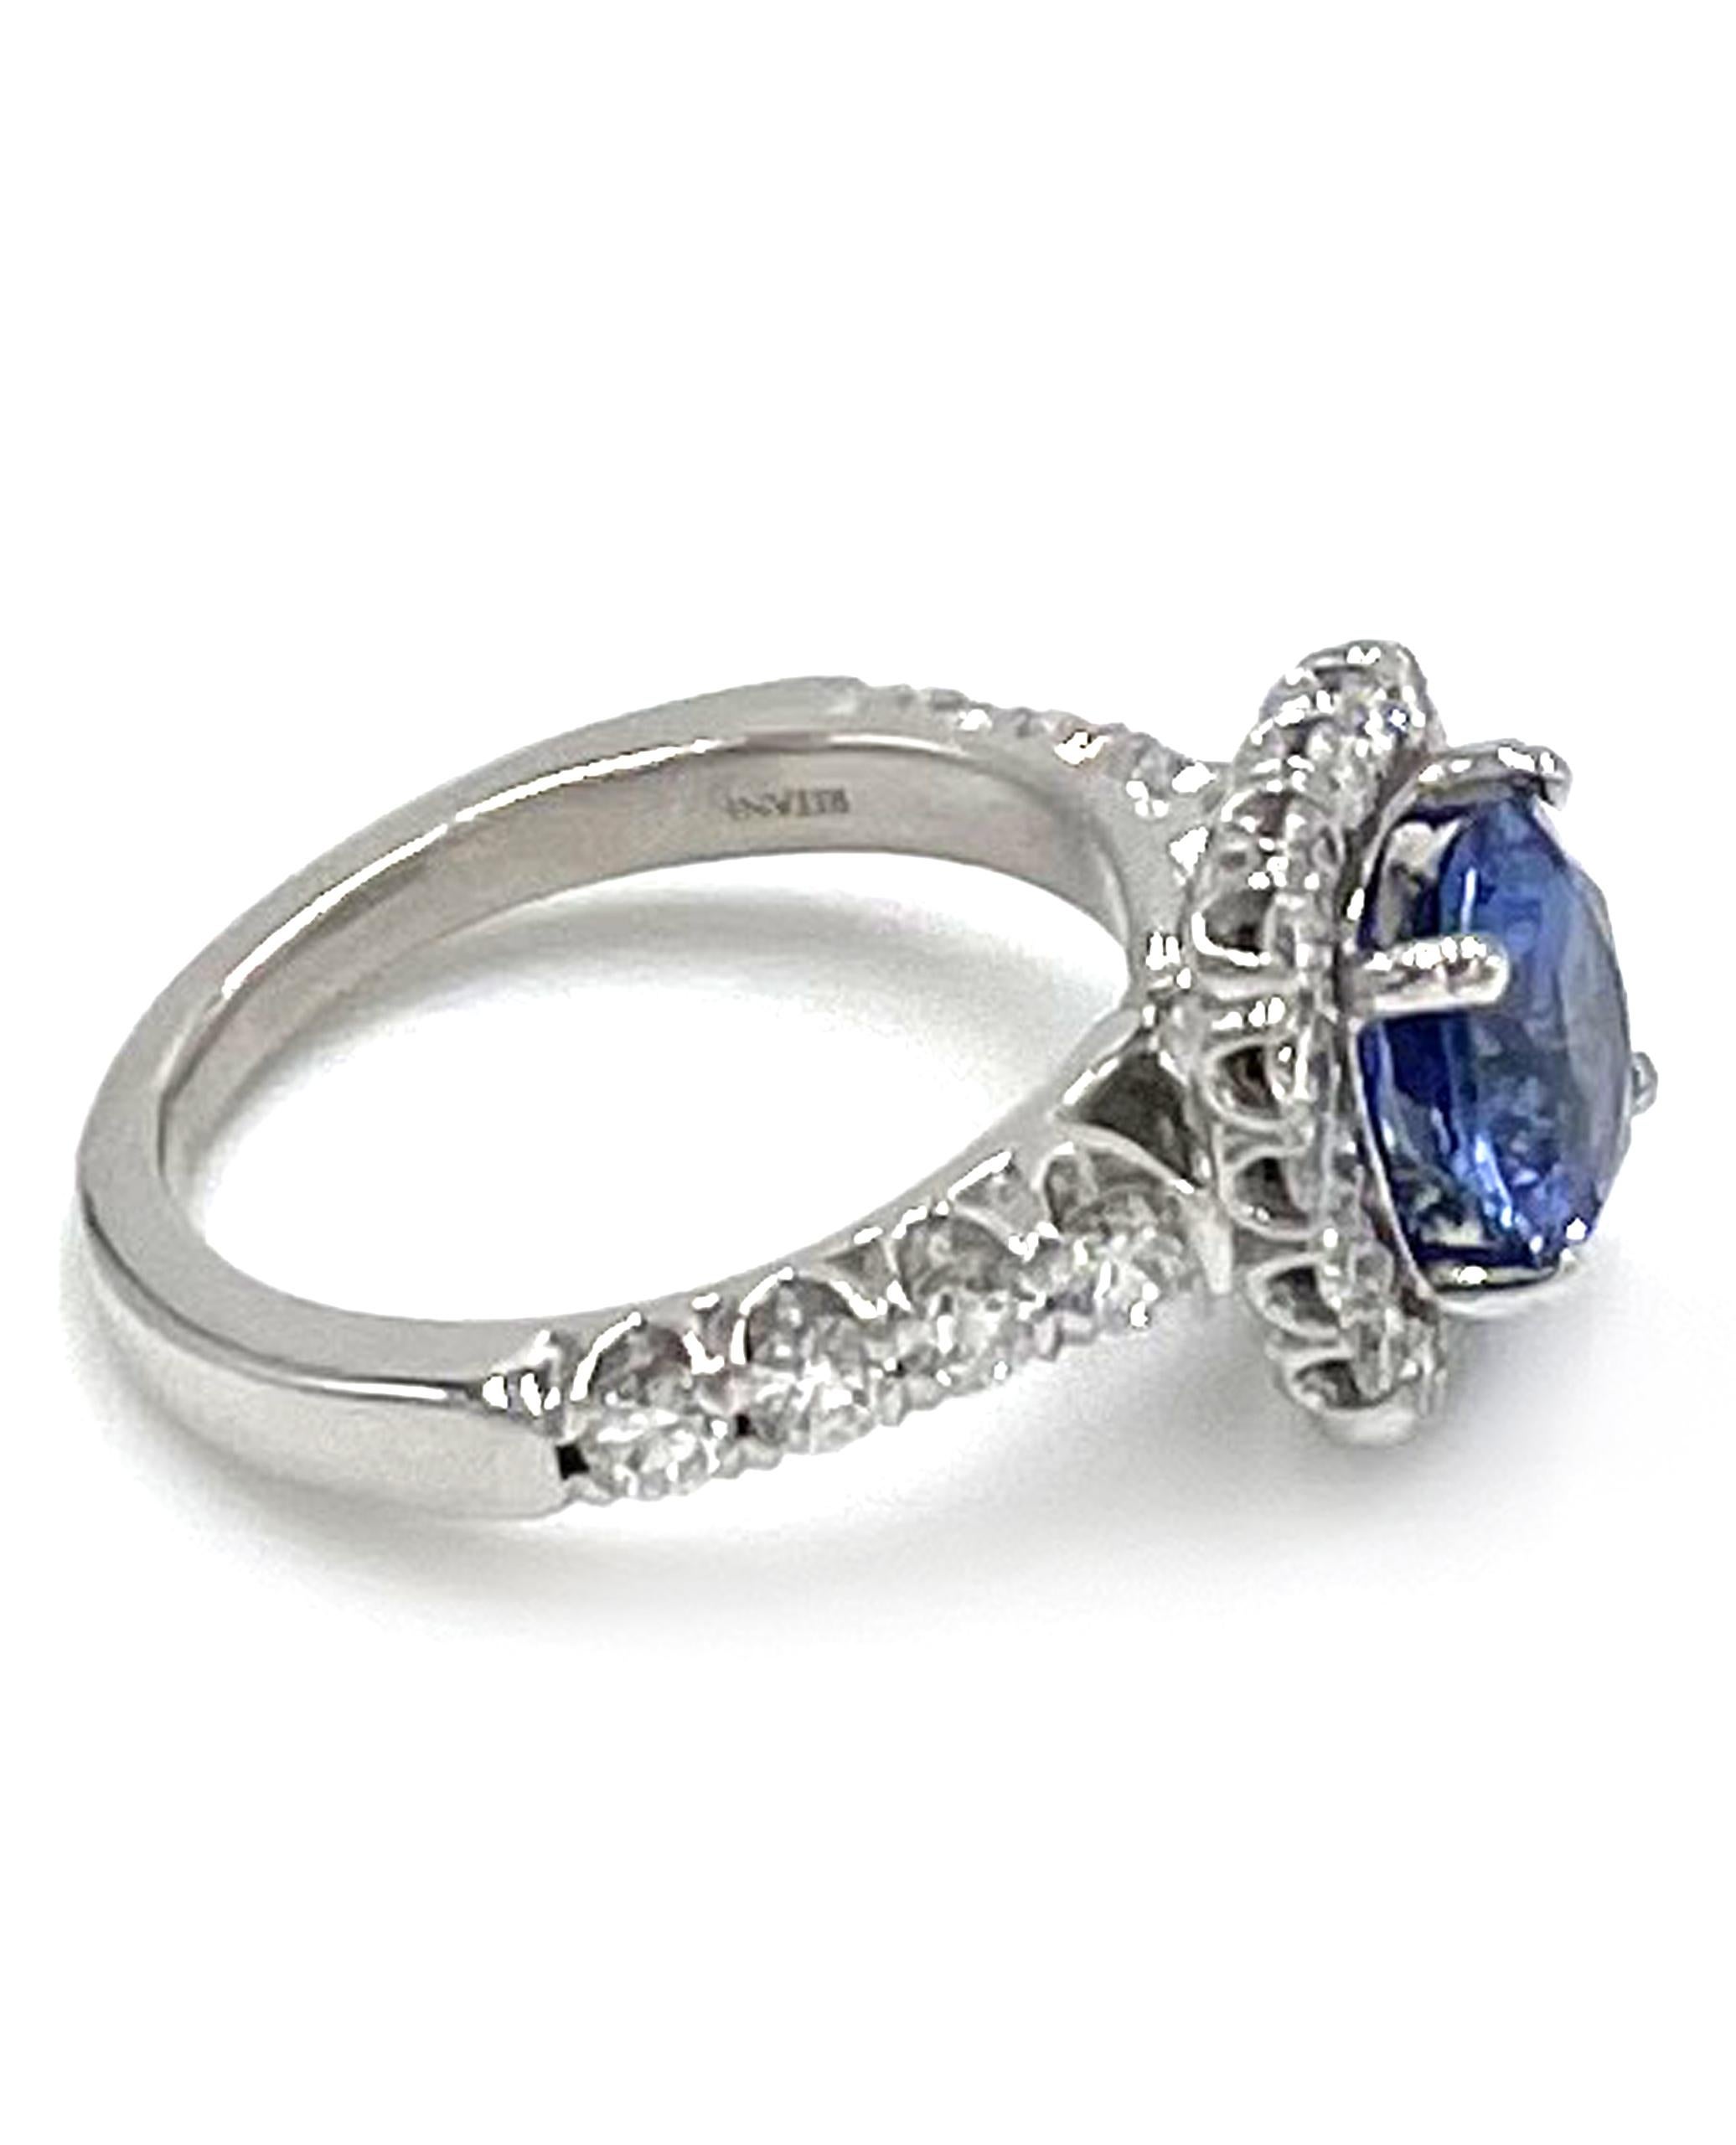 Ritani 1RZ2817 14K white gold Masterwork Collection, cushion halo engagement ring with 0.86 carat diamonds.  G/H Color, VS Clarity. 
Center One Round GIA Certified Blue Sapphire 1.80 carats.

* Diamonds are G/H color, VS clarity.
* Finger size 5
*